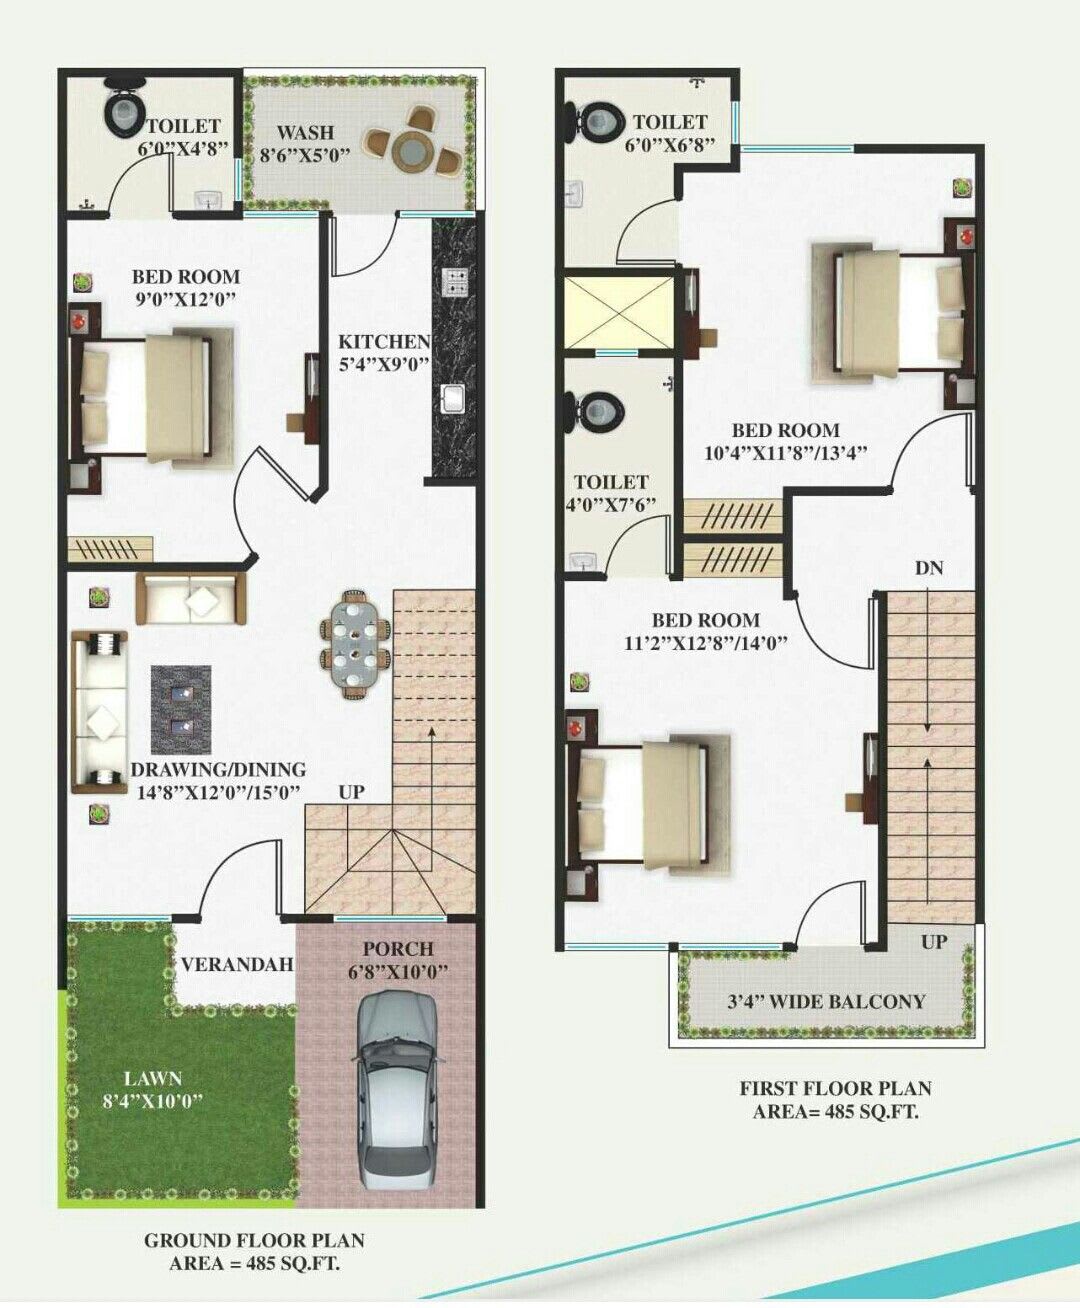 Draw Architectural Floor Plans And Sections Elevation By Expertrabeel